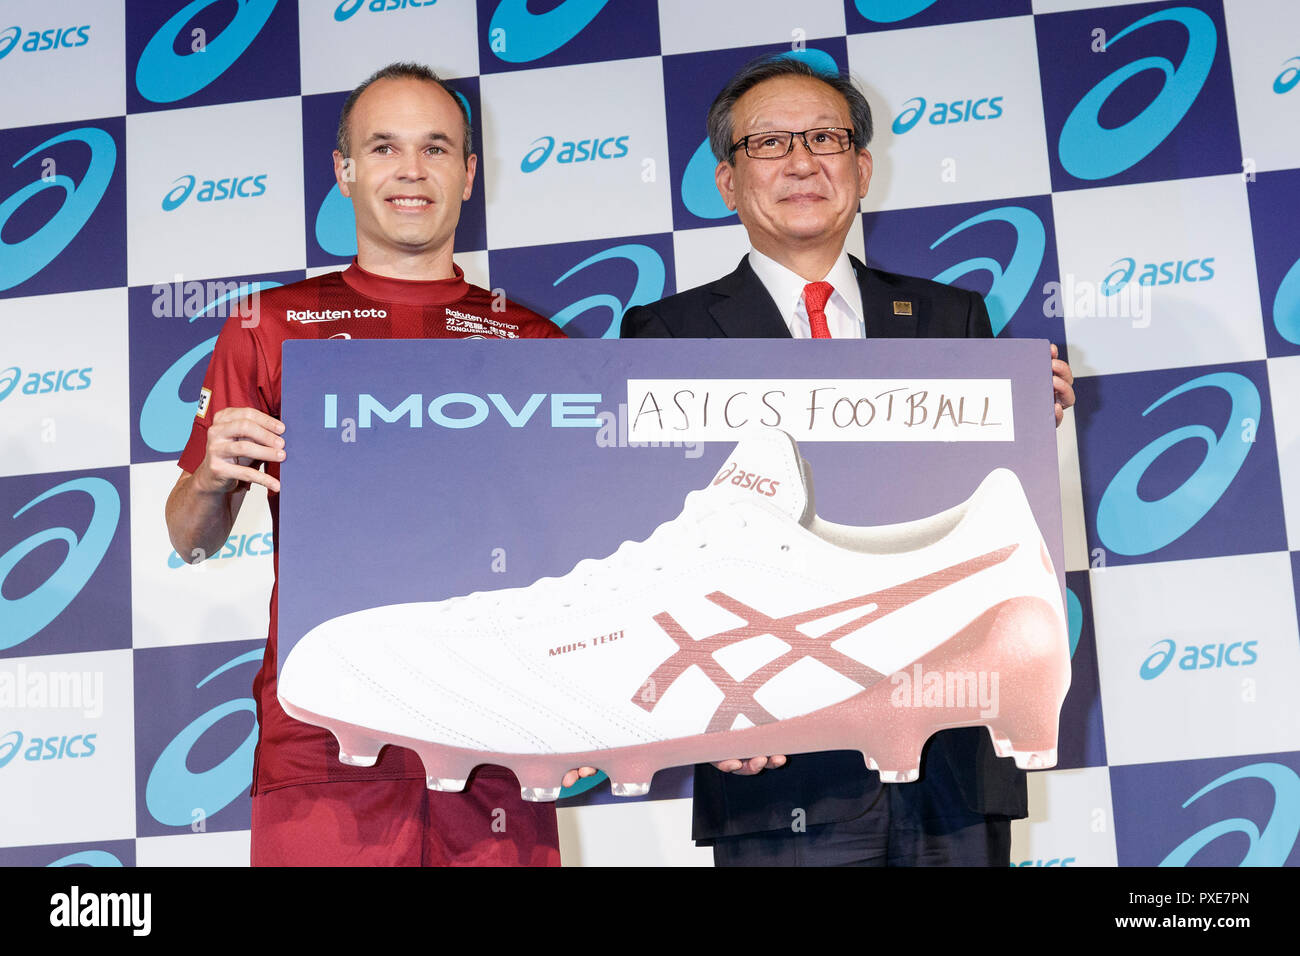 L to R) Andres Iniesta of Vissel Kobe and Motoi Oyama CEO of ASICS pose for  the cameras, during a news conference on October 22, 2018, Tokyo, Japan.  The former Barcelona and